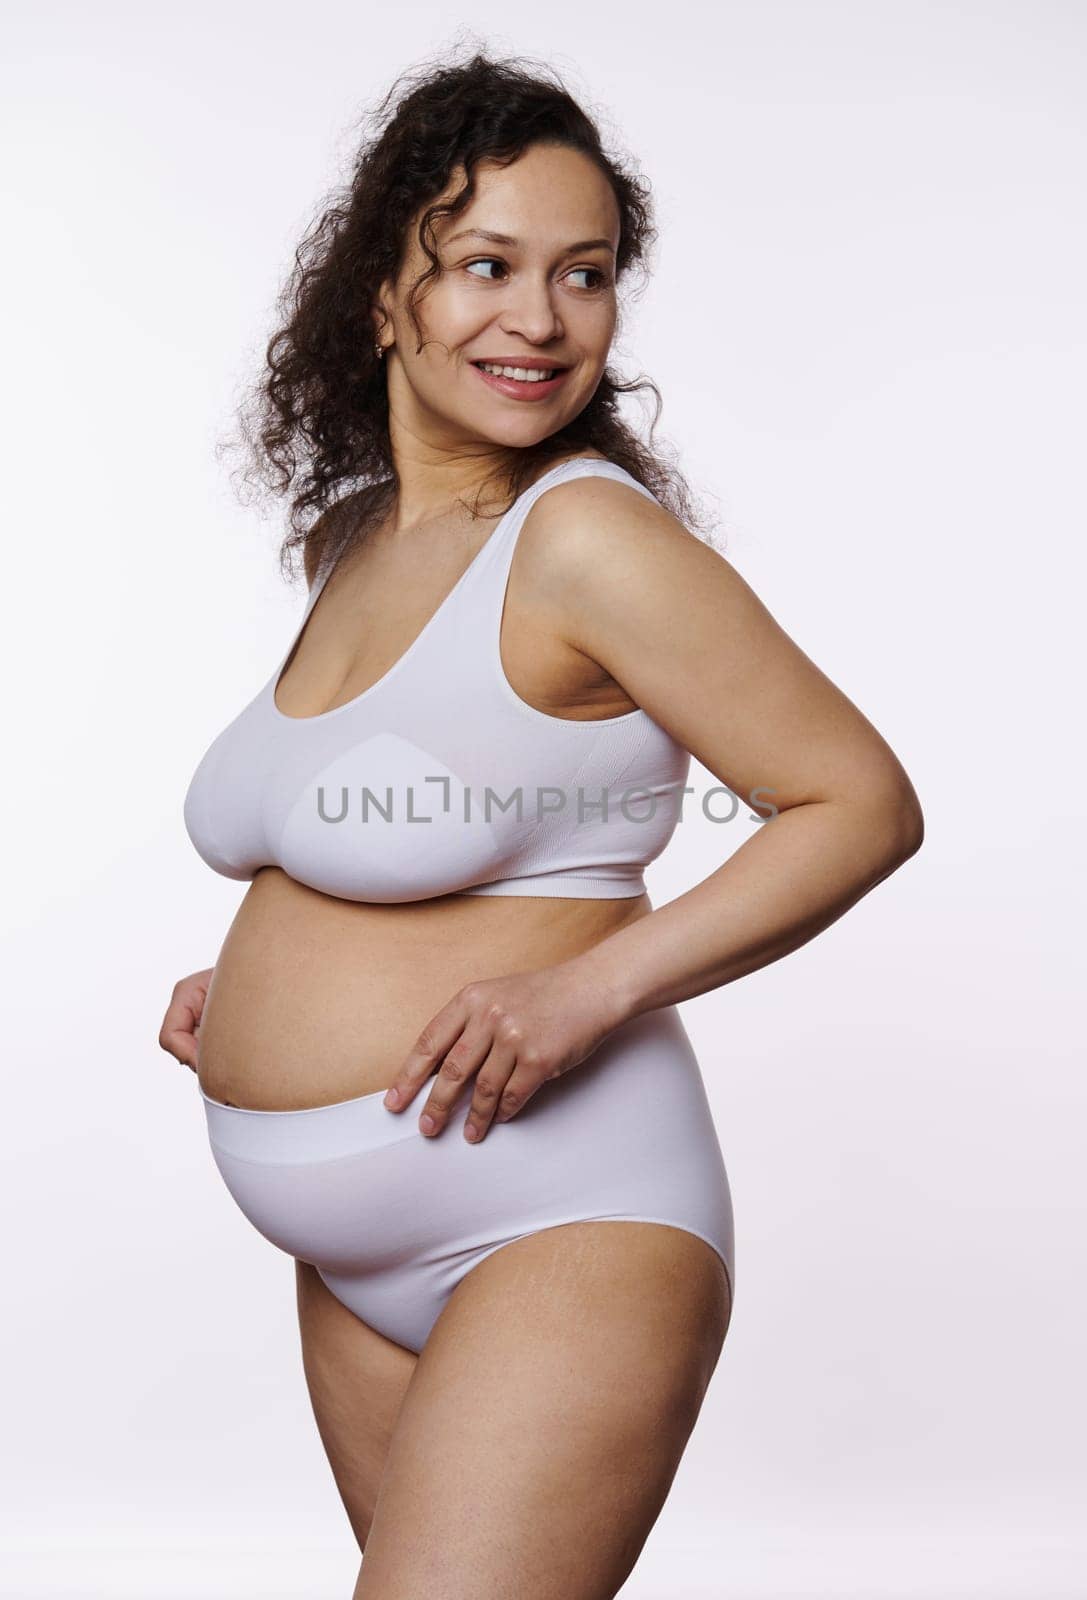 Charming multi ethnic positive pregnant woman, expectant mother, gravid female smiling, looking away, posing bare belly in comfortable lingerie, isolated on white background. Pregnancy Body positivity